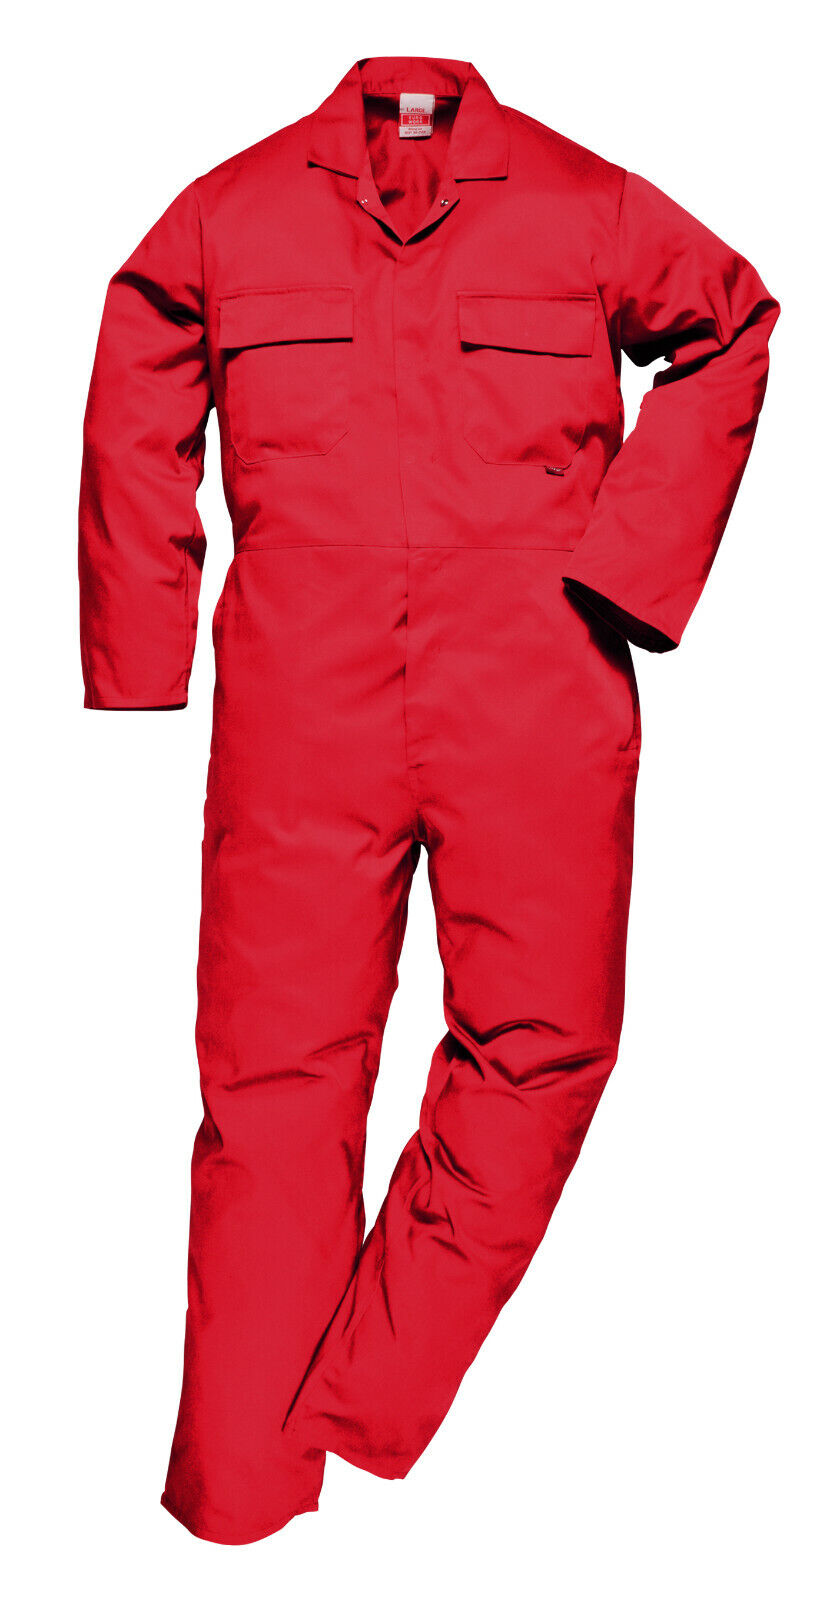 Portwest S999 Euro Work Polycotton Coverall Mechanic Jumpsuit Safety Overalls PORTWEST S999 - фотография #9